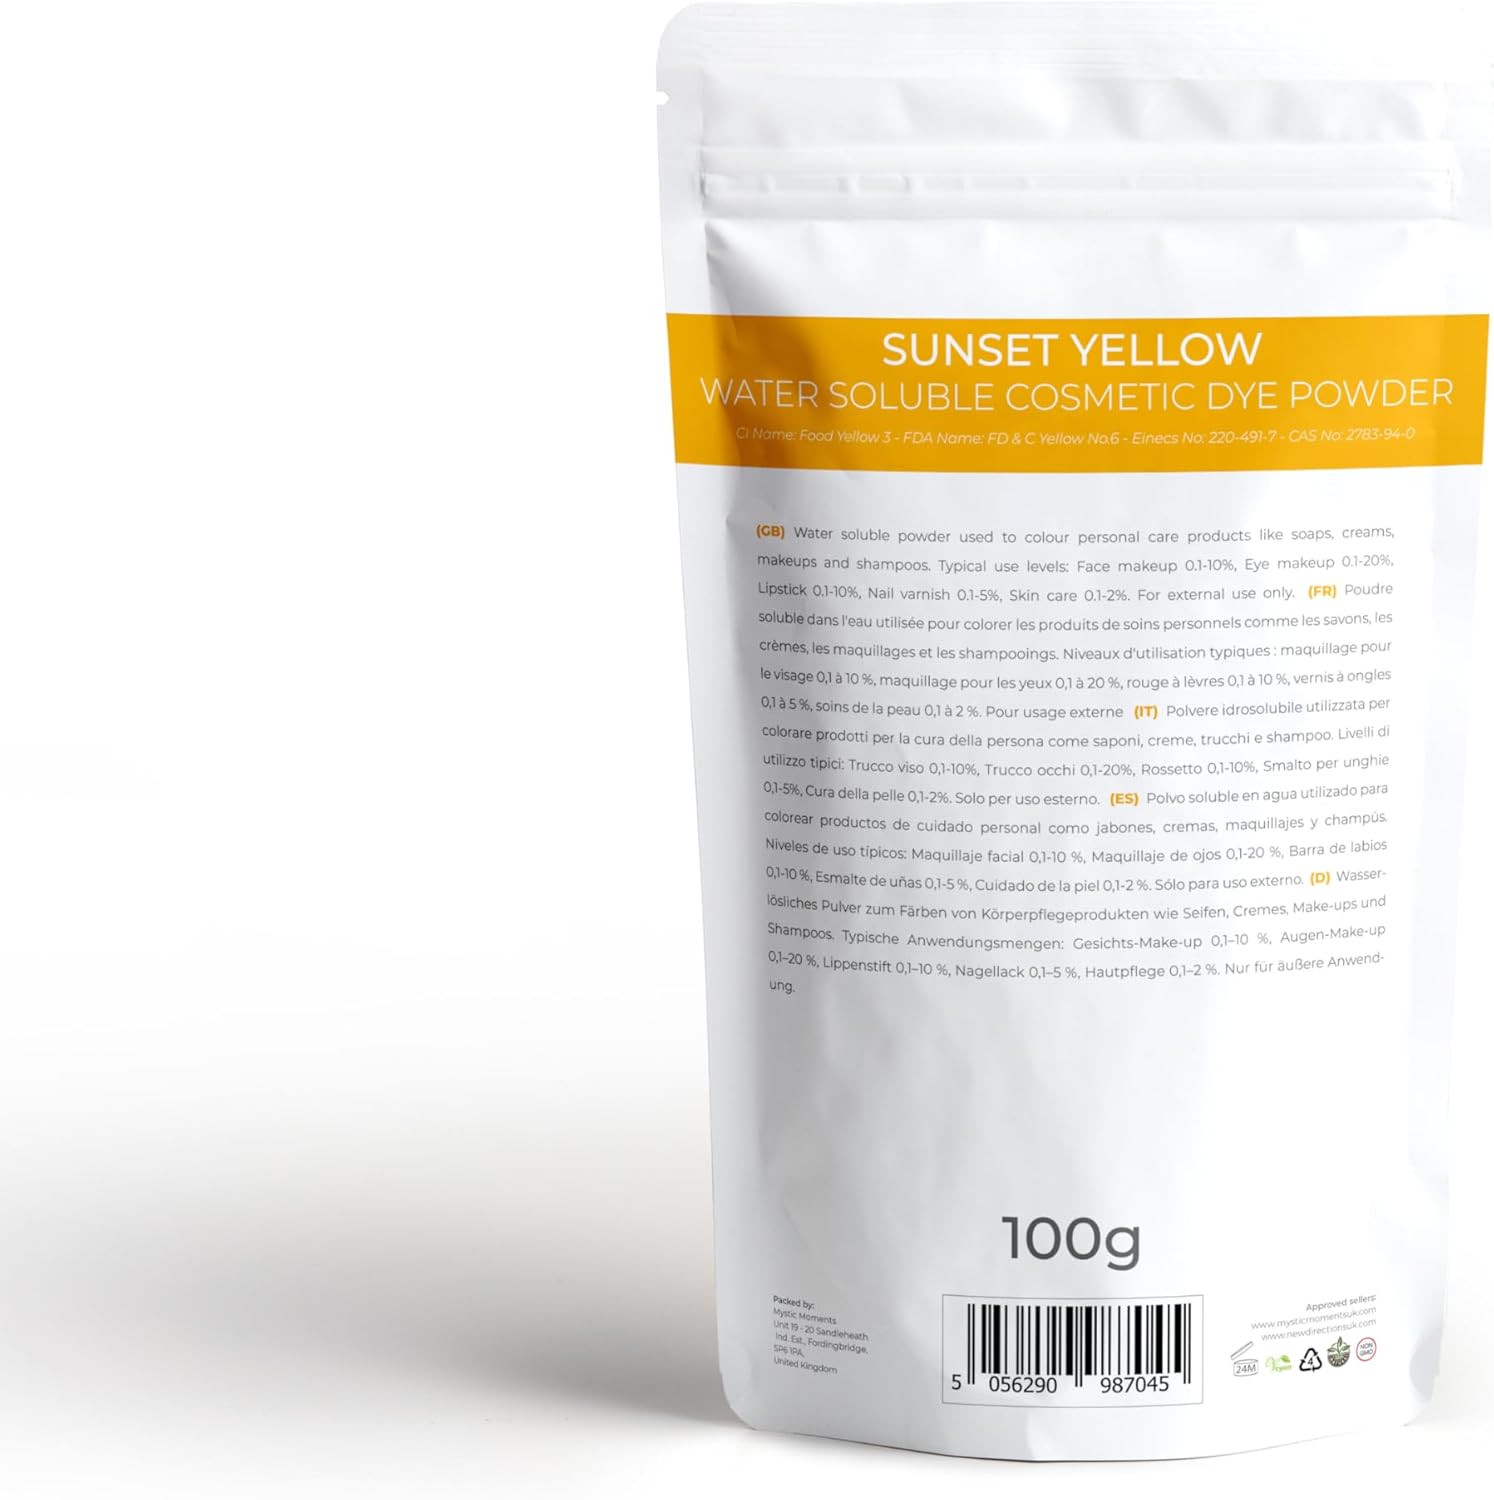 Mystic Moments | Sunset Yellow Water-Soluble Cosmetic Dye Powder 100g | Perfect for Soap Making, Creams, Make Ups, Shampoos and Lotions : Amazon.co.uk: Home & Kitchen